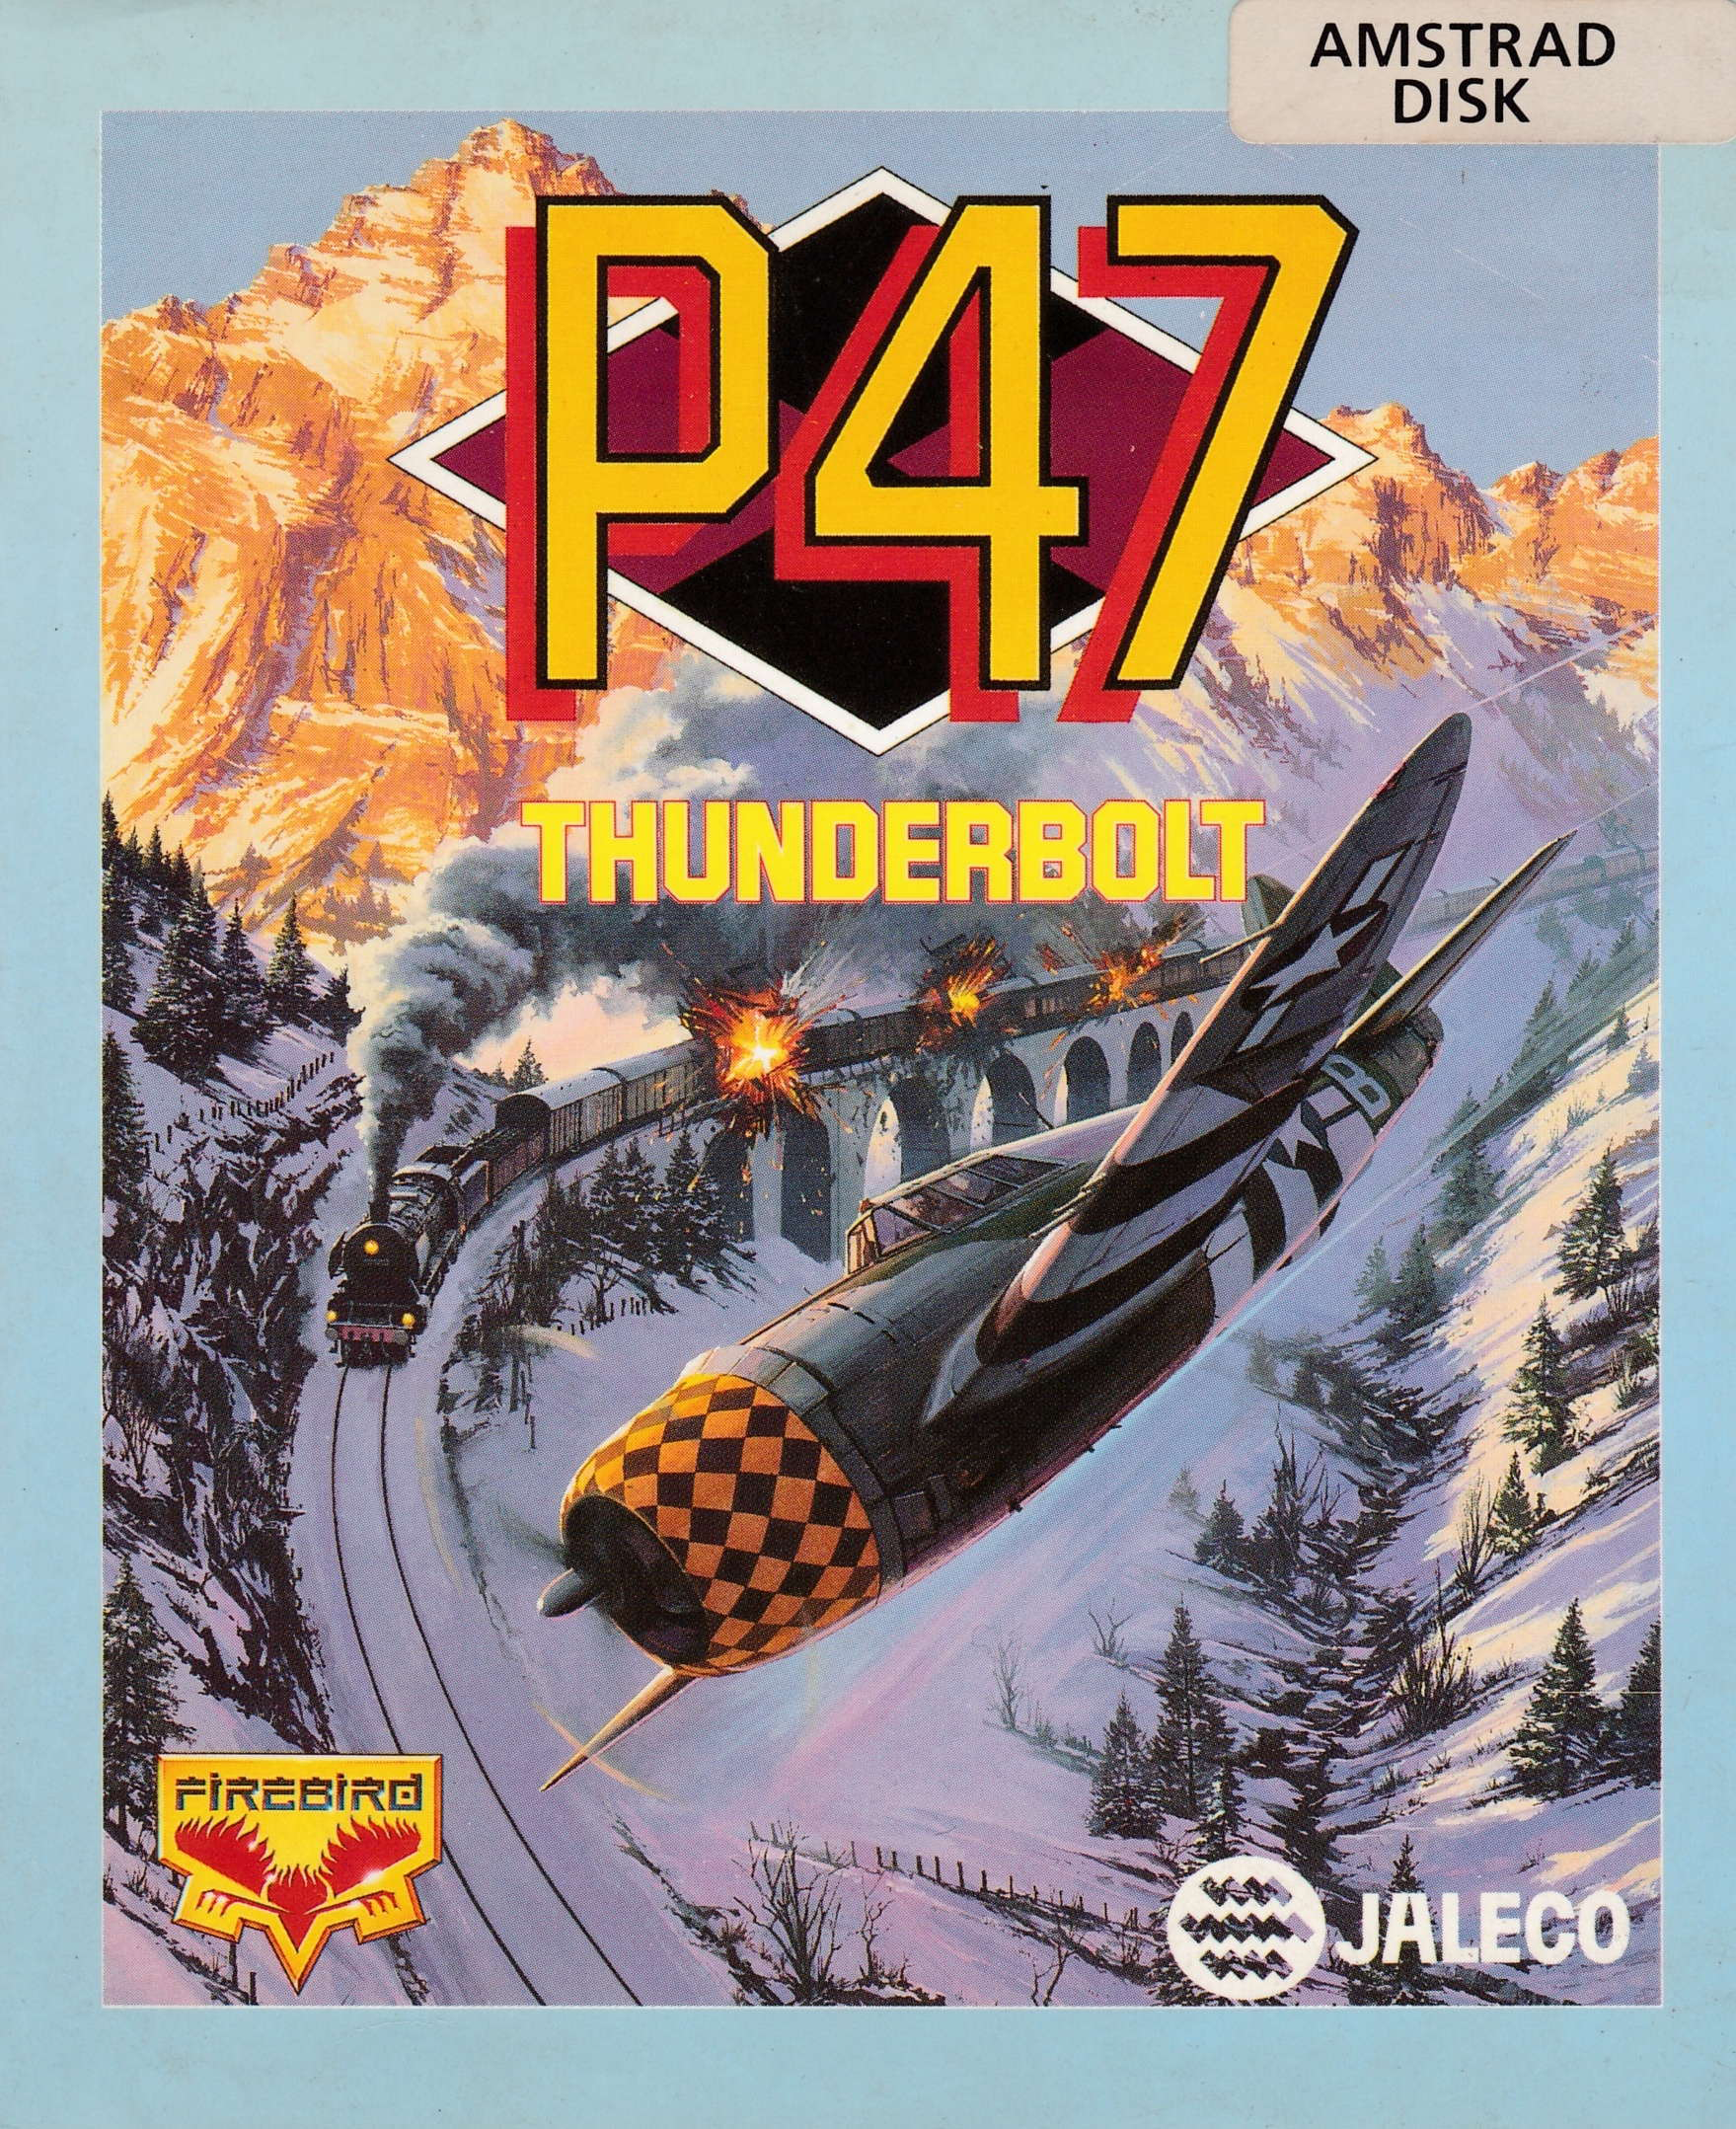 cover of the Amstrad CPC game P47 Thunderbolt  by GameBase CPC